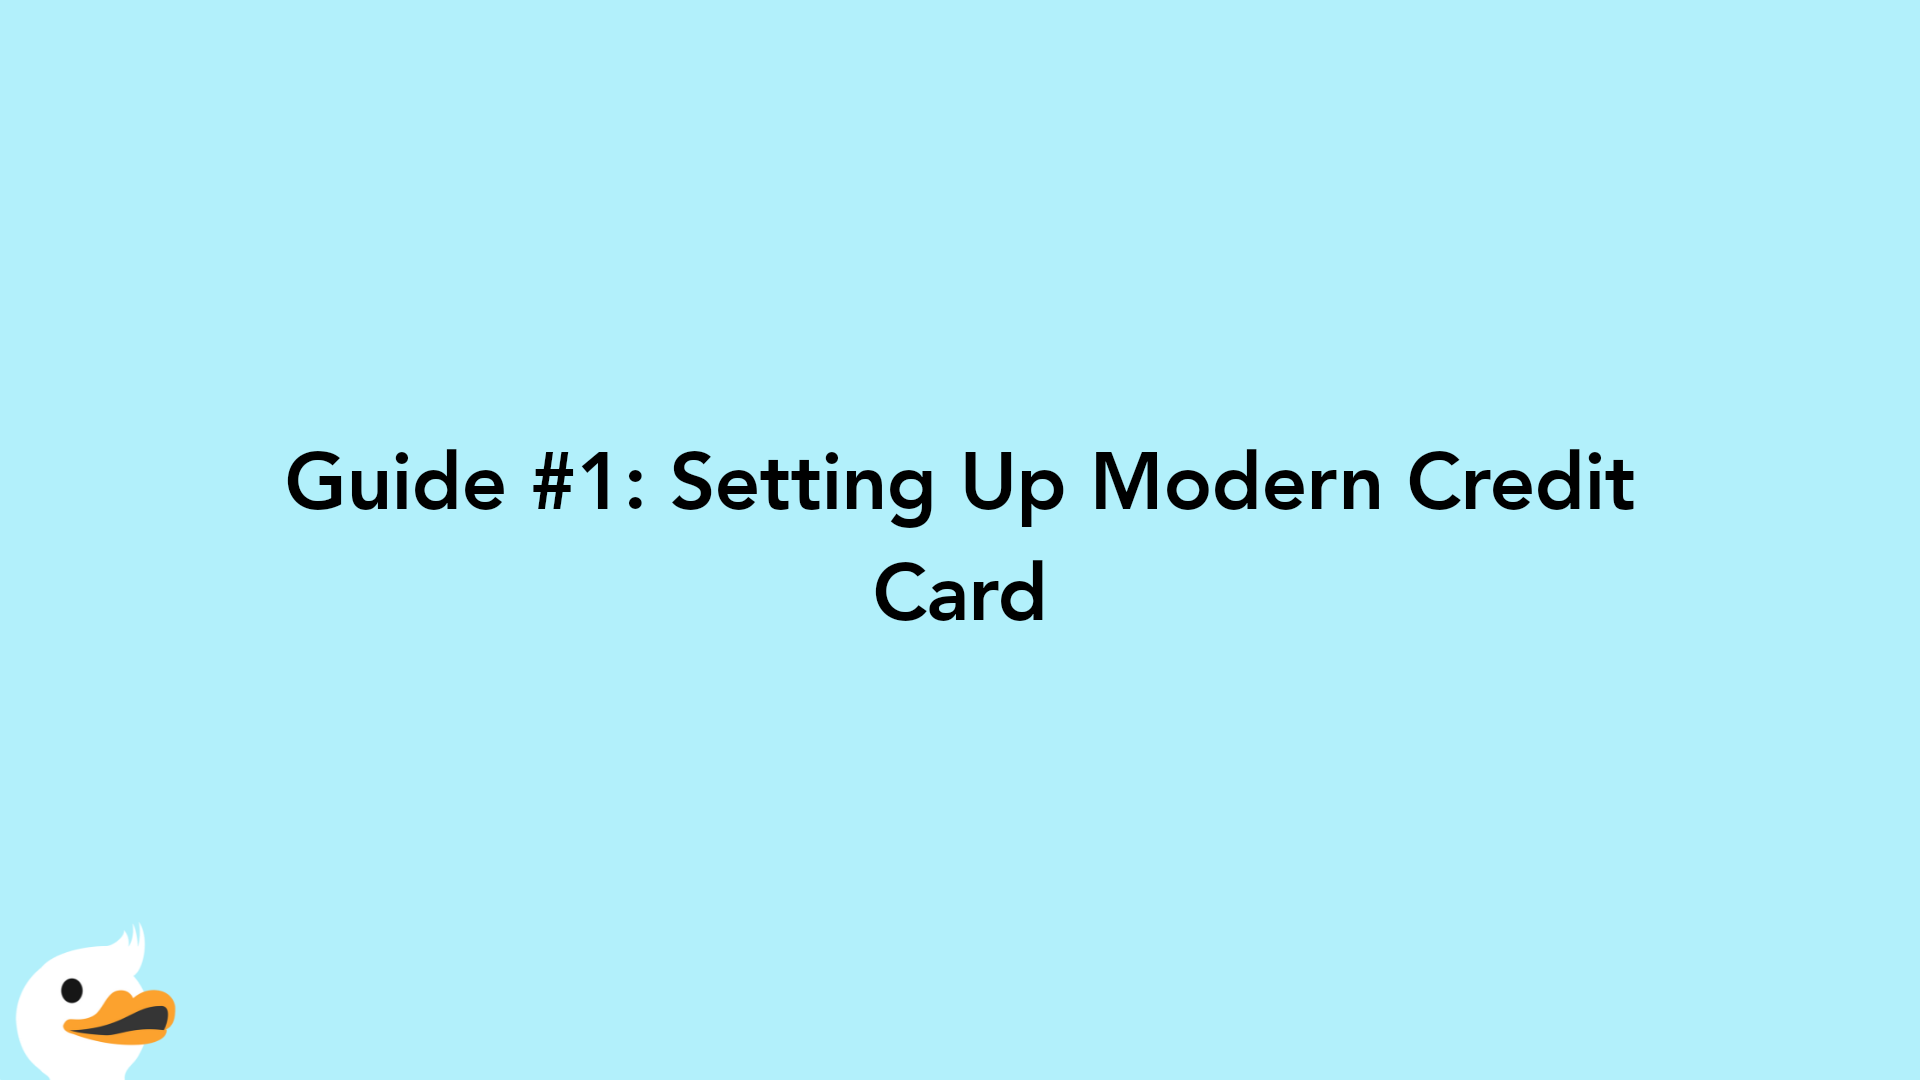 Guide #1: Setting Up Modern Credit Card